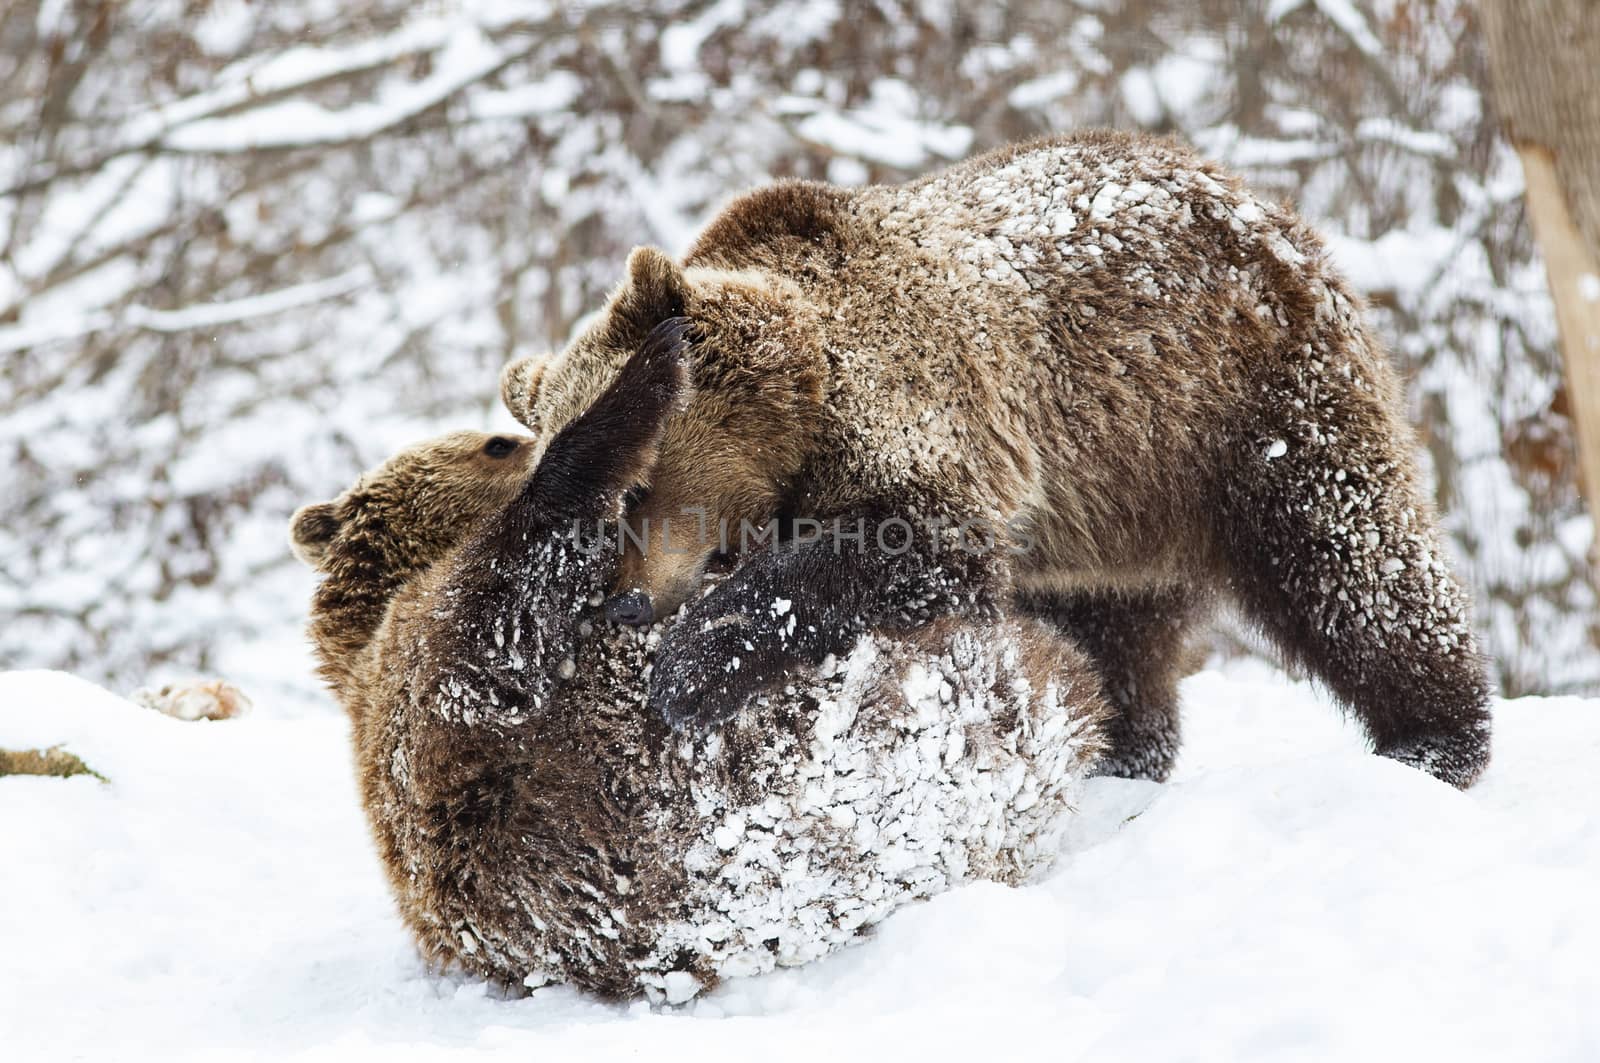 bear cubs playing in snow by melis